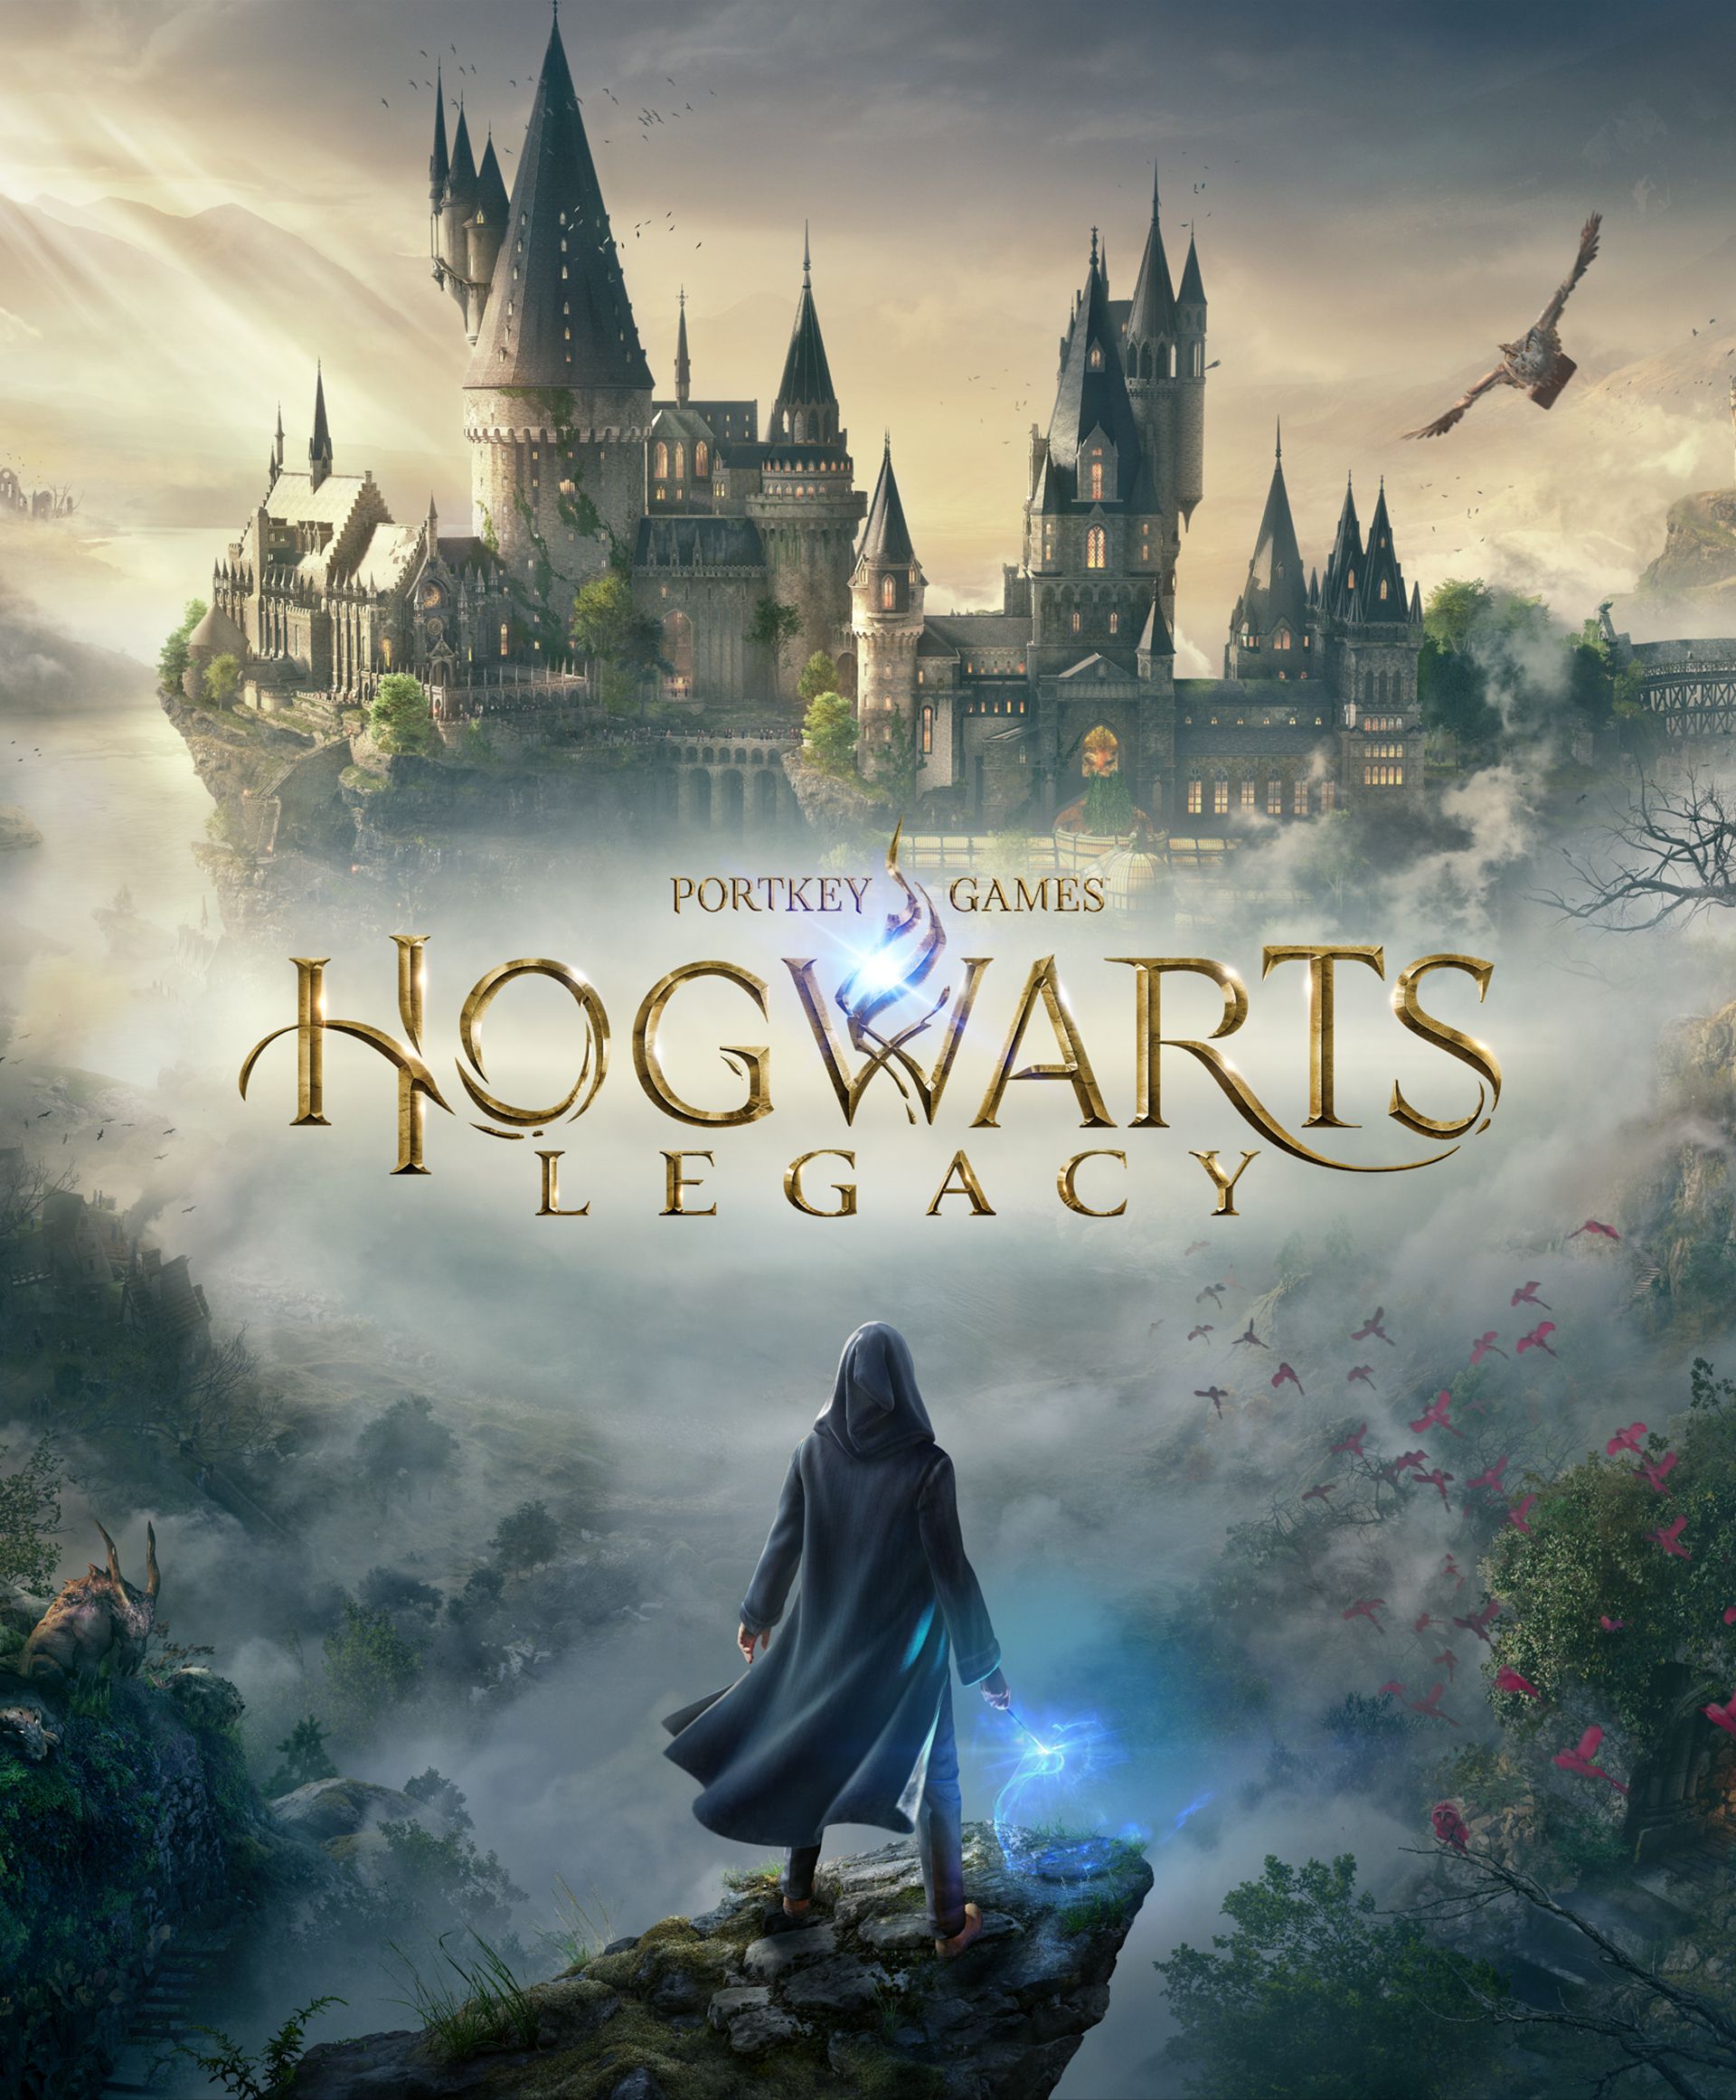 Hogwarts Legacy Poster Wallpaper, HD Games 4K Wallpaper, Image, Photo and Background